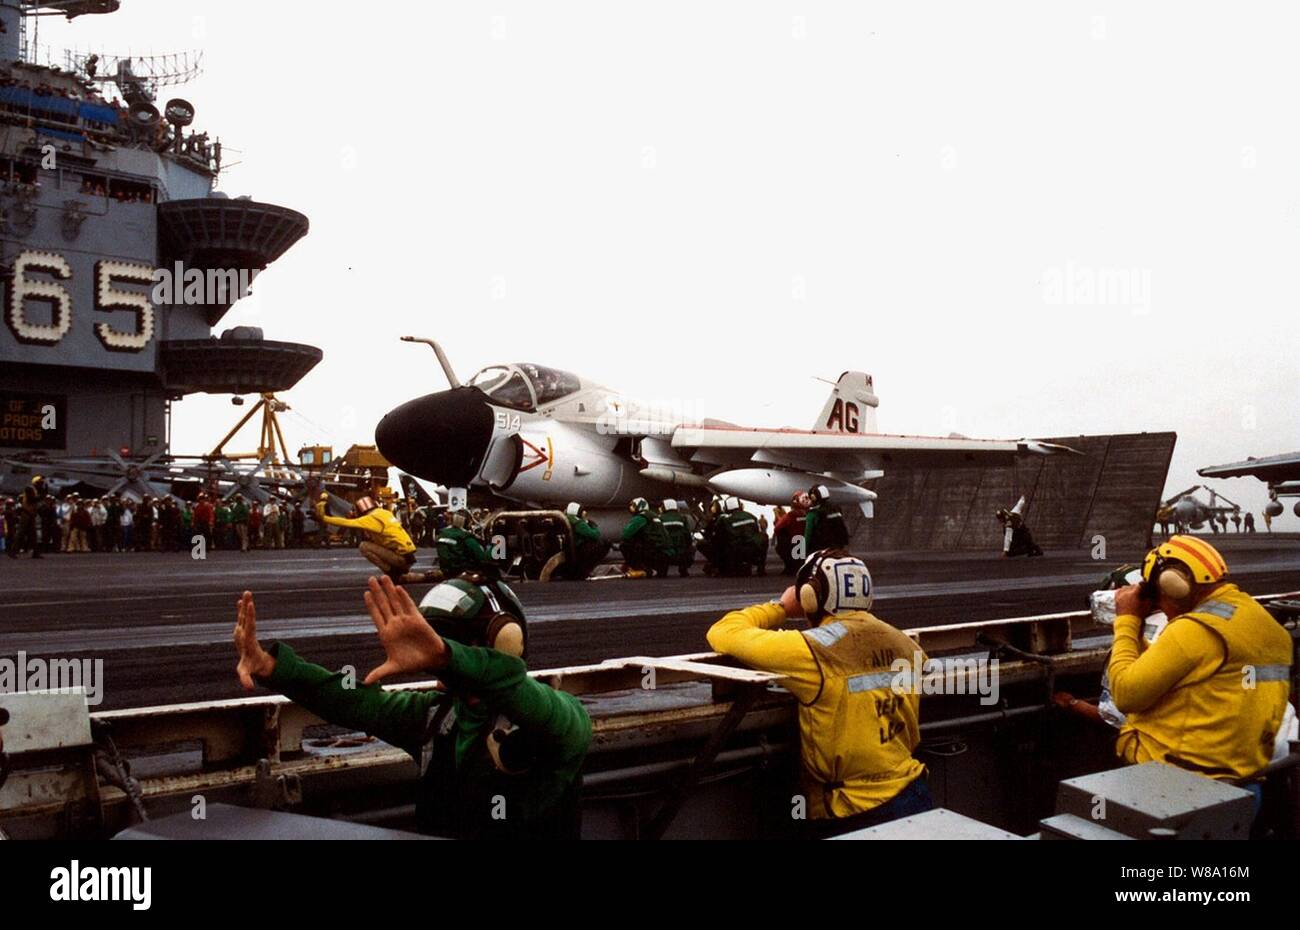 A U.S. Navy A-6E Intruder receives the signal to launch from catapult three of the aircraft carrier USS Enterprise (CVN 65), on Dec. 19, 1996, marking the last Intruder squadron to fly from the deck of an aircraft carrier.  The Intruder, from Attack Squadron 75, Naval Air Station Oceana, Va., sports the AG tail code and paint scheme representing Carrier Air Wing 7, the squadronХs first air wing over 30 years ago.  The squadron, known as the Sunday Punchers, will be decommissioned in early 1997. Stock Photo